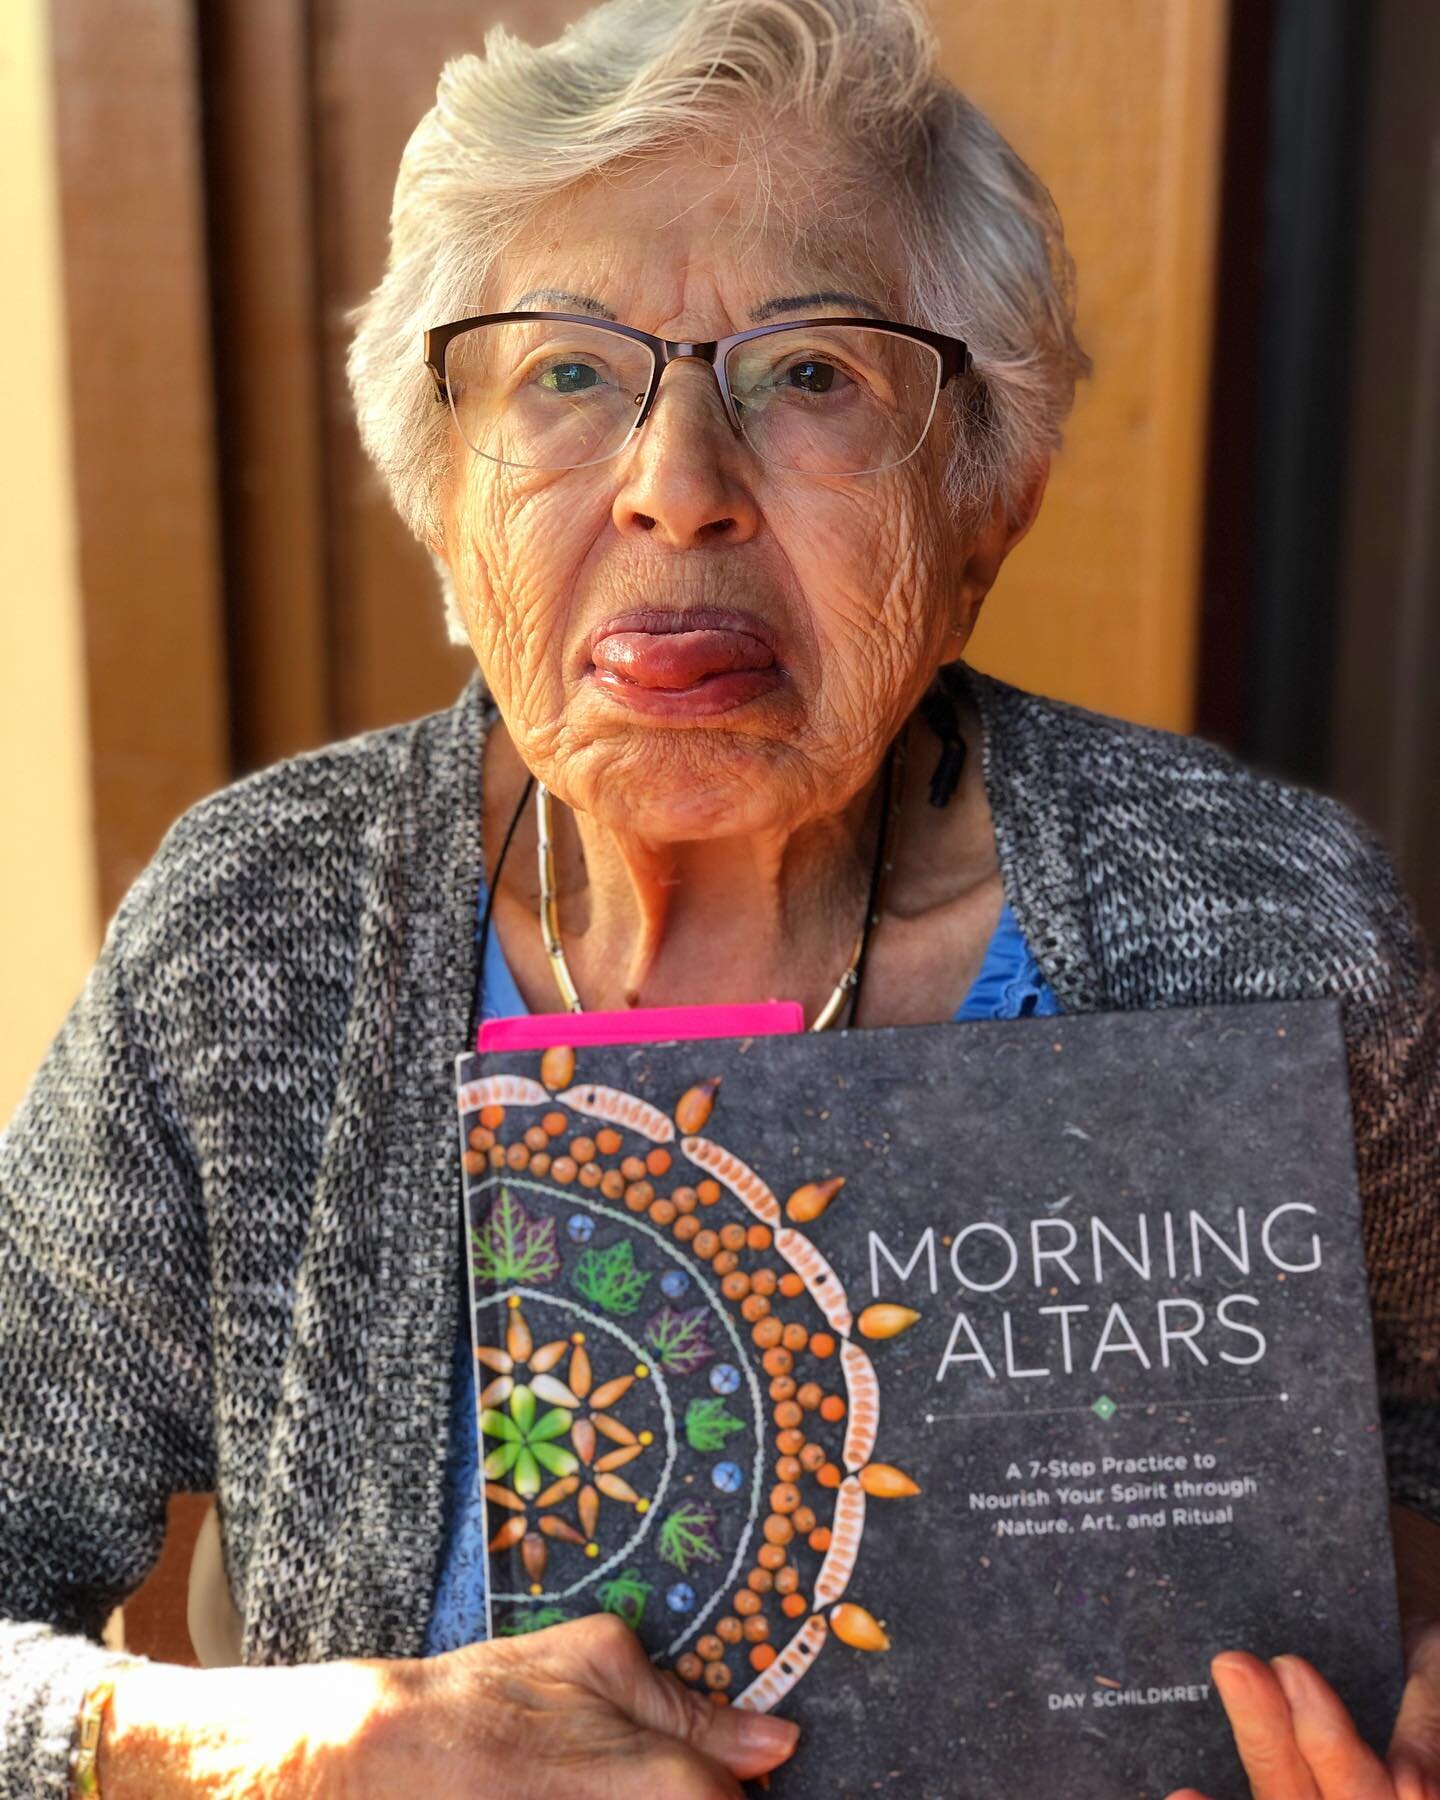 Day 4 of the 5 day GIVEAWAY to celebrate the 5-year-anniversary of &ldquo;Morning Altars: A 7-Step Practice to Nourish Your Spirit through Nature, Art and Ritual&rdquo; being published!

The giveaway is simple. For 5 days, we will be giving away 15 s